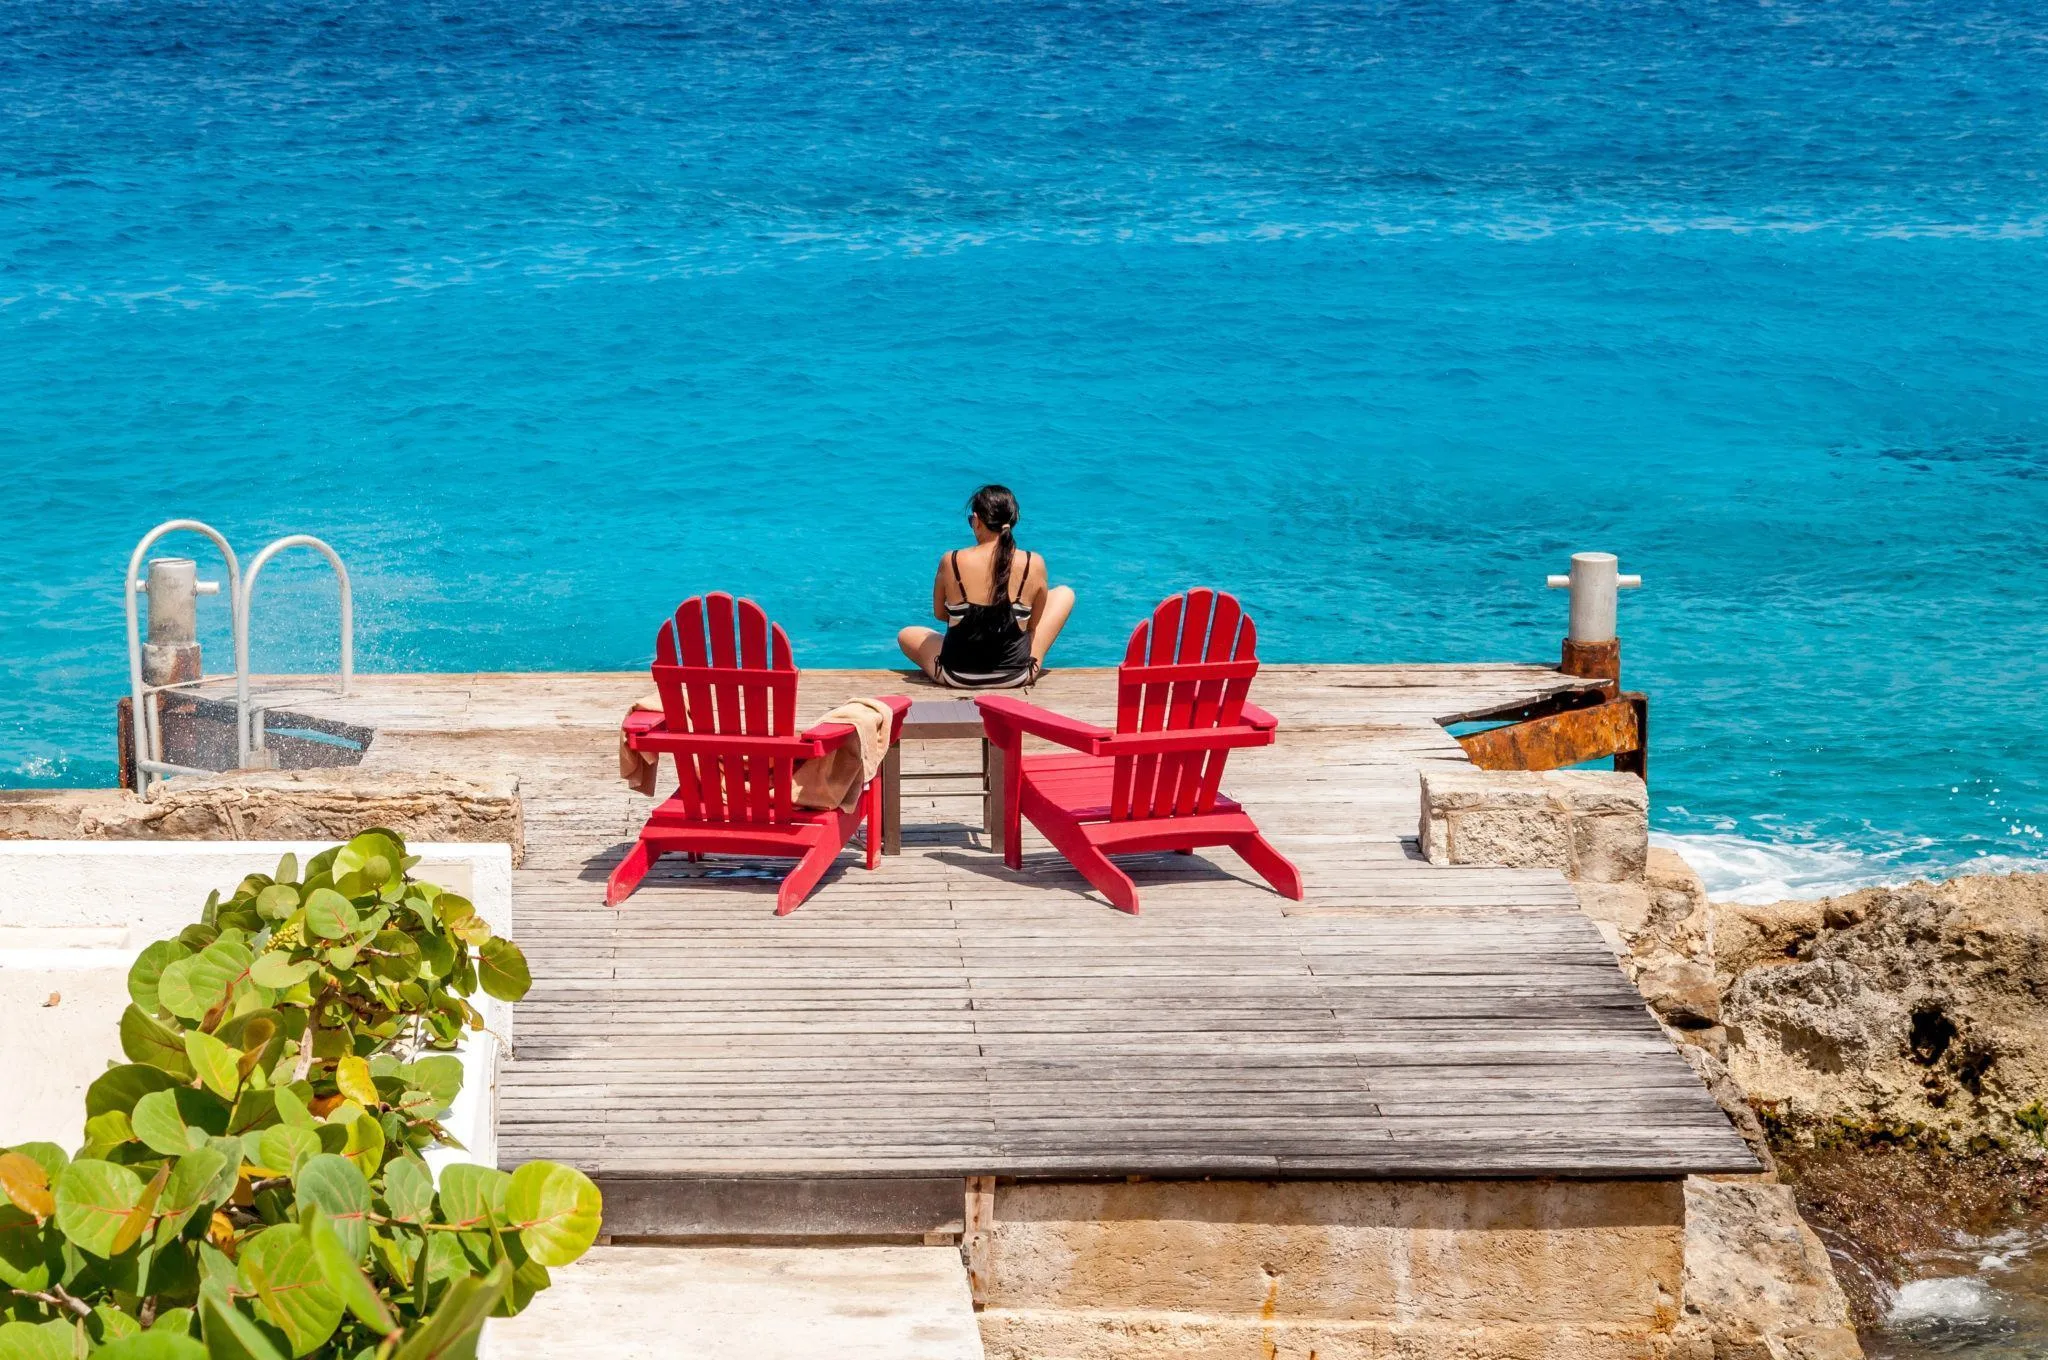 Woman sitting on a small dock with red beach chairs